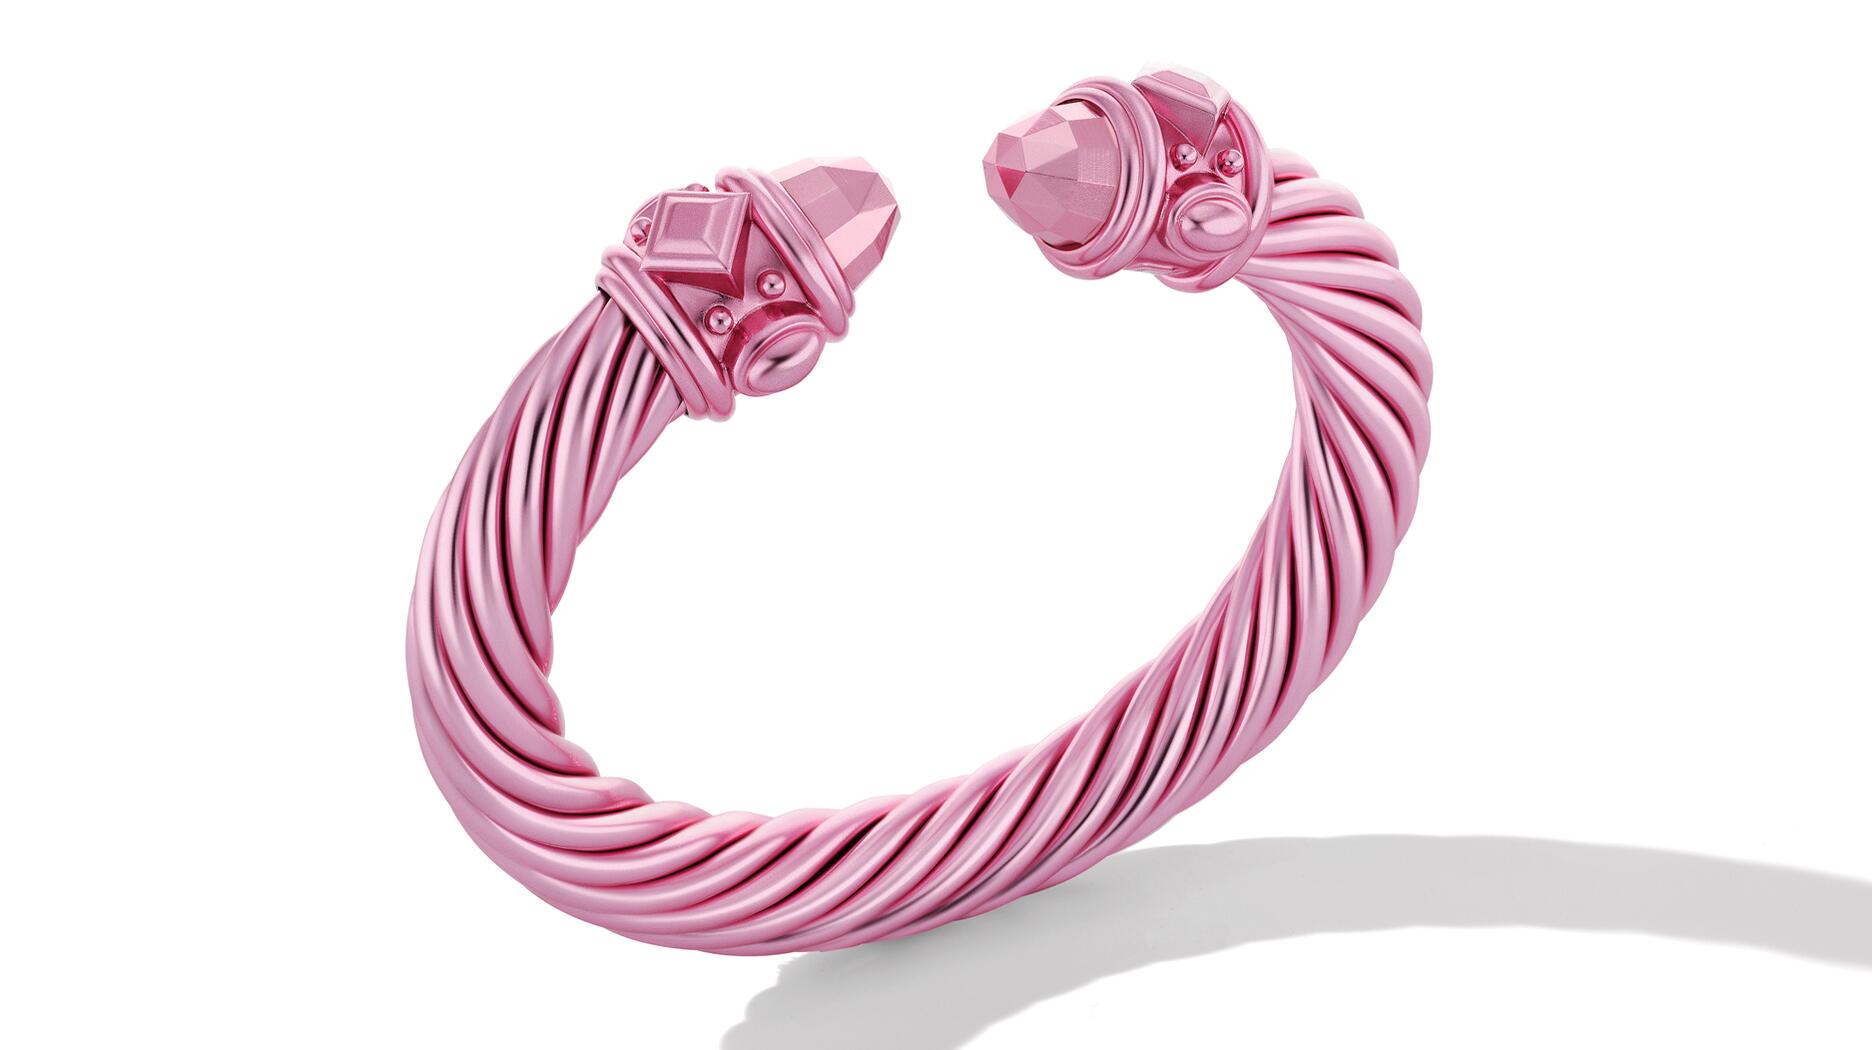 The David Yurman Cable Bracelet Just Got a Colorful Makeover